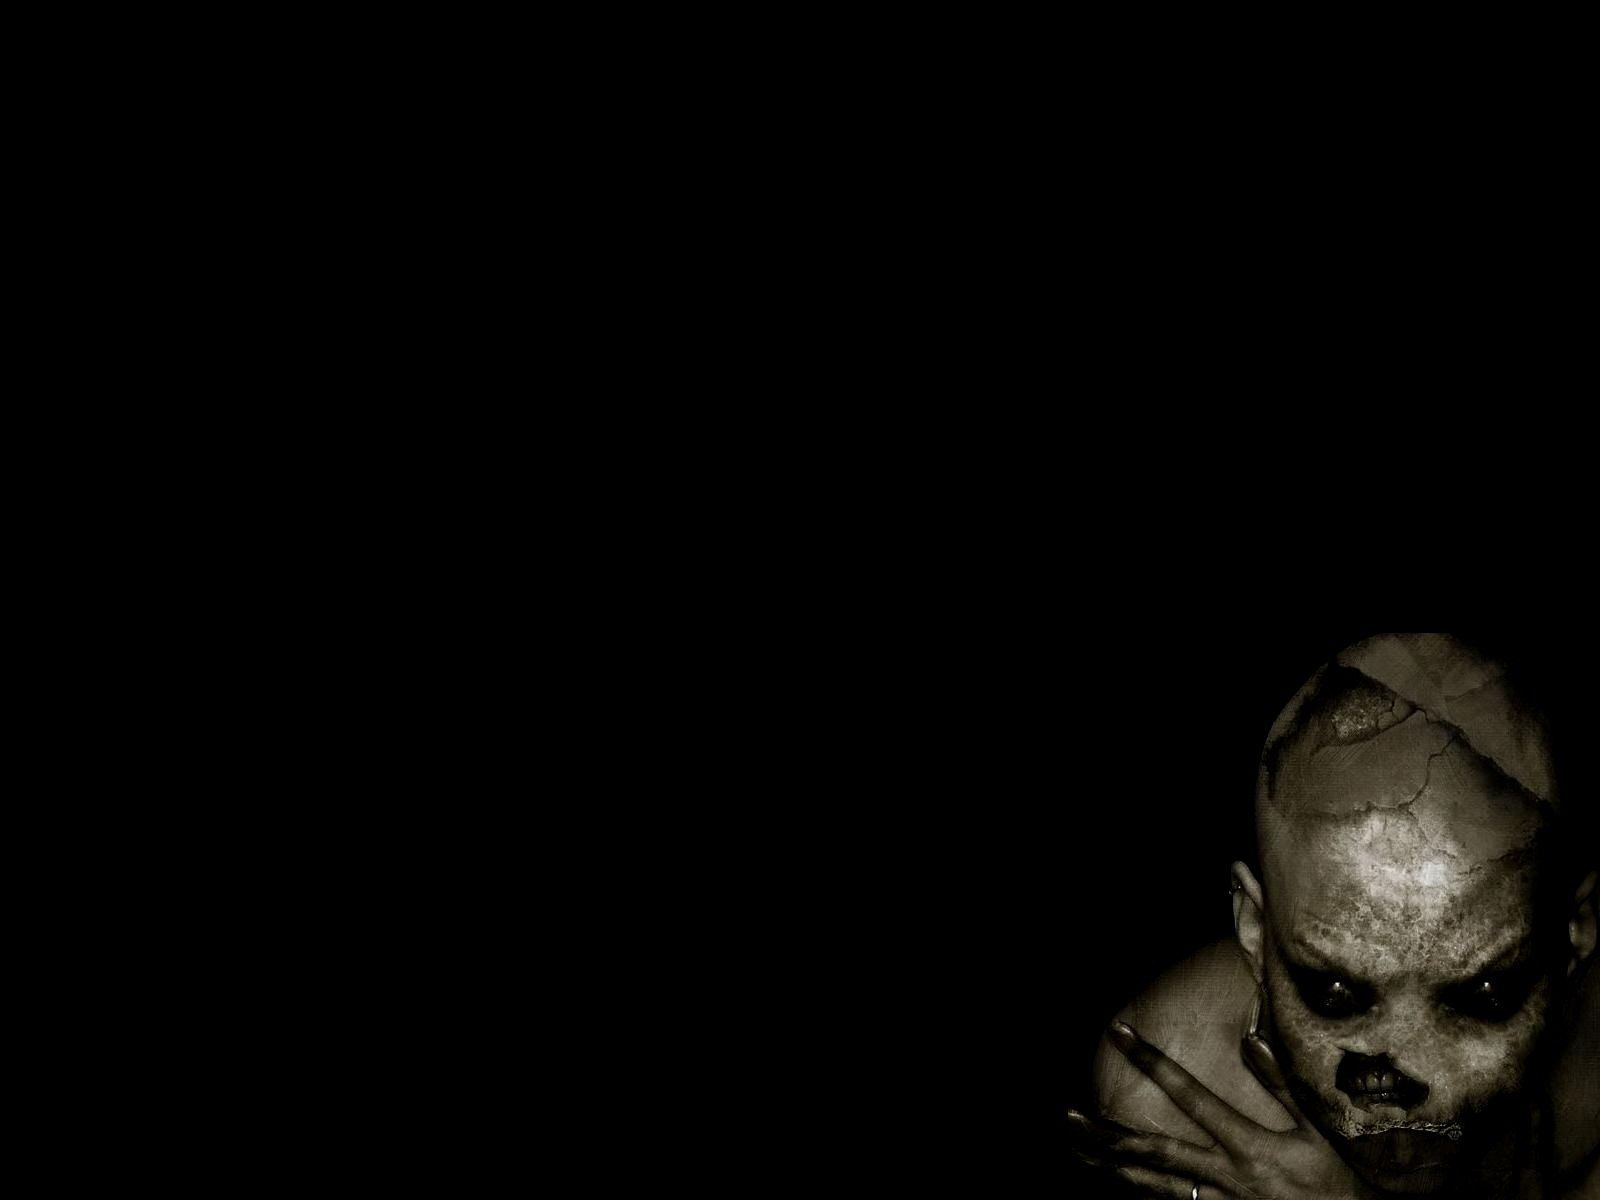 Zombie wallpaper 1600x1200 - High Quality and other